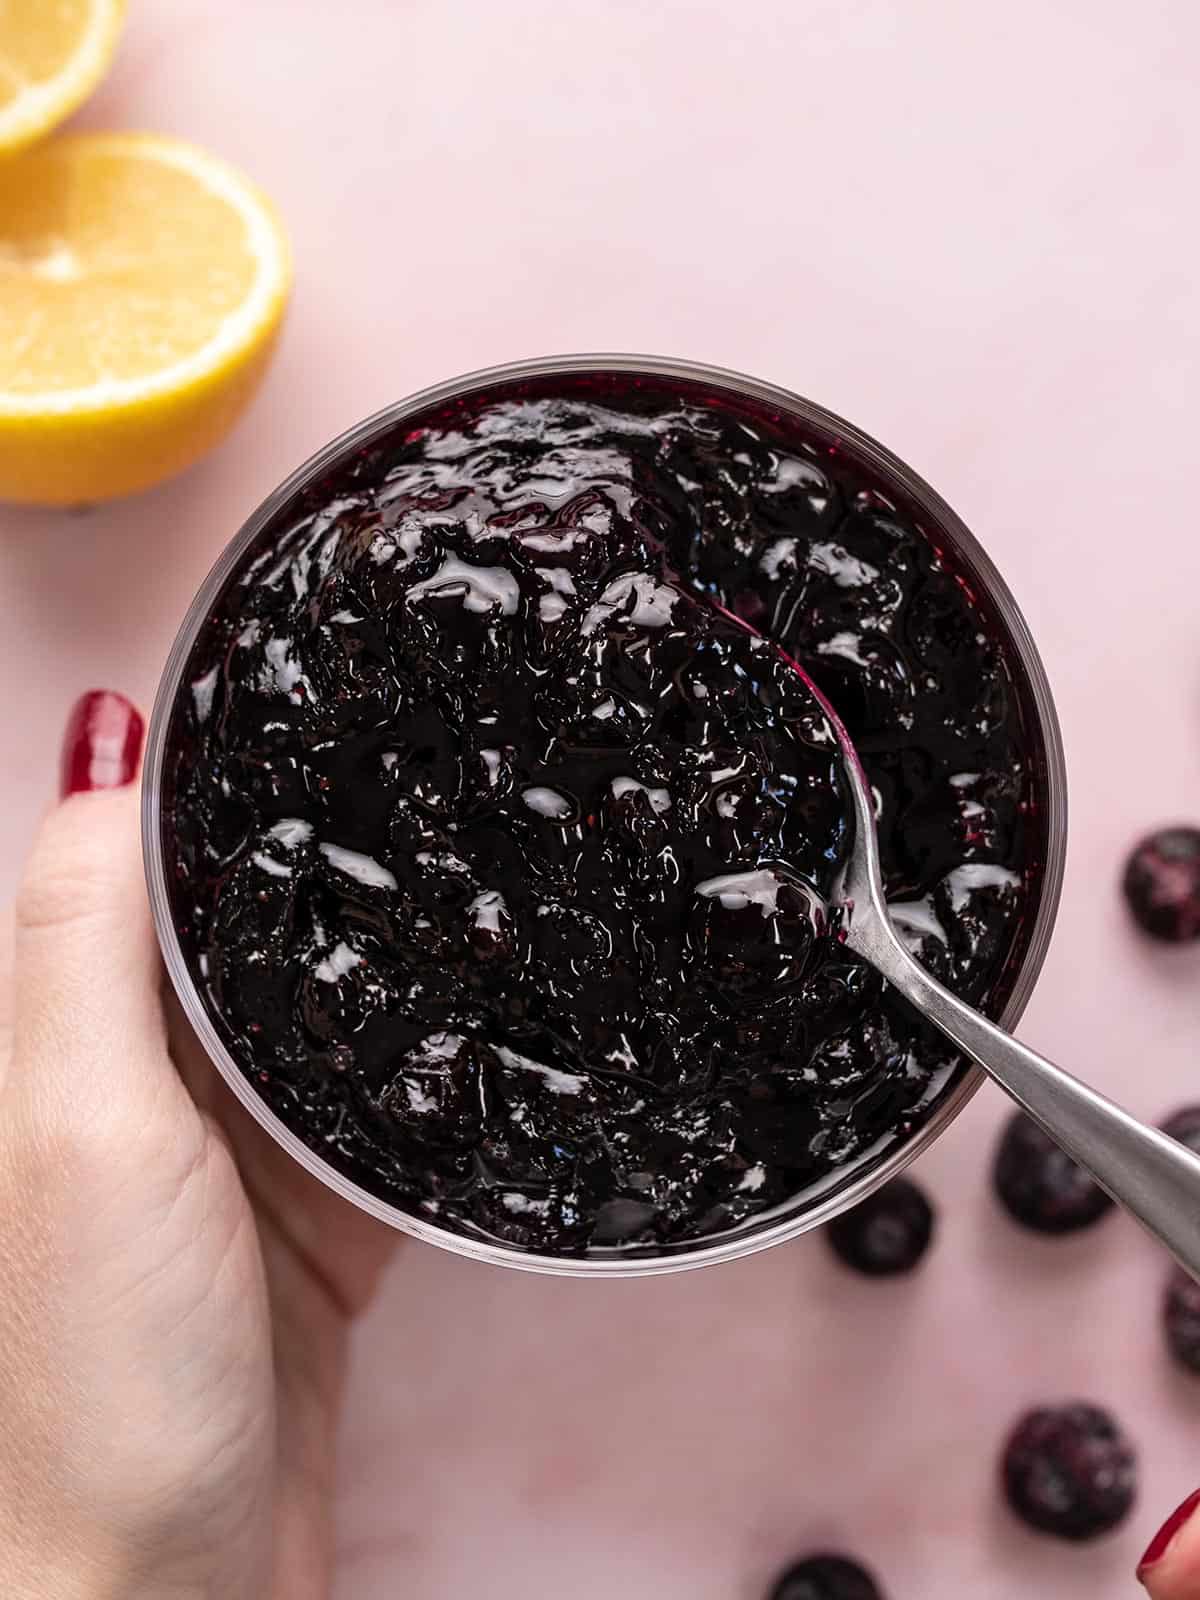 Overhead shot of blueberry sauce in a serving bowl.